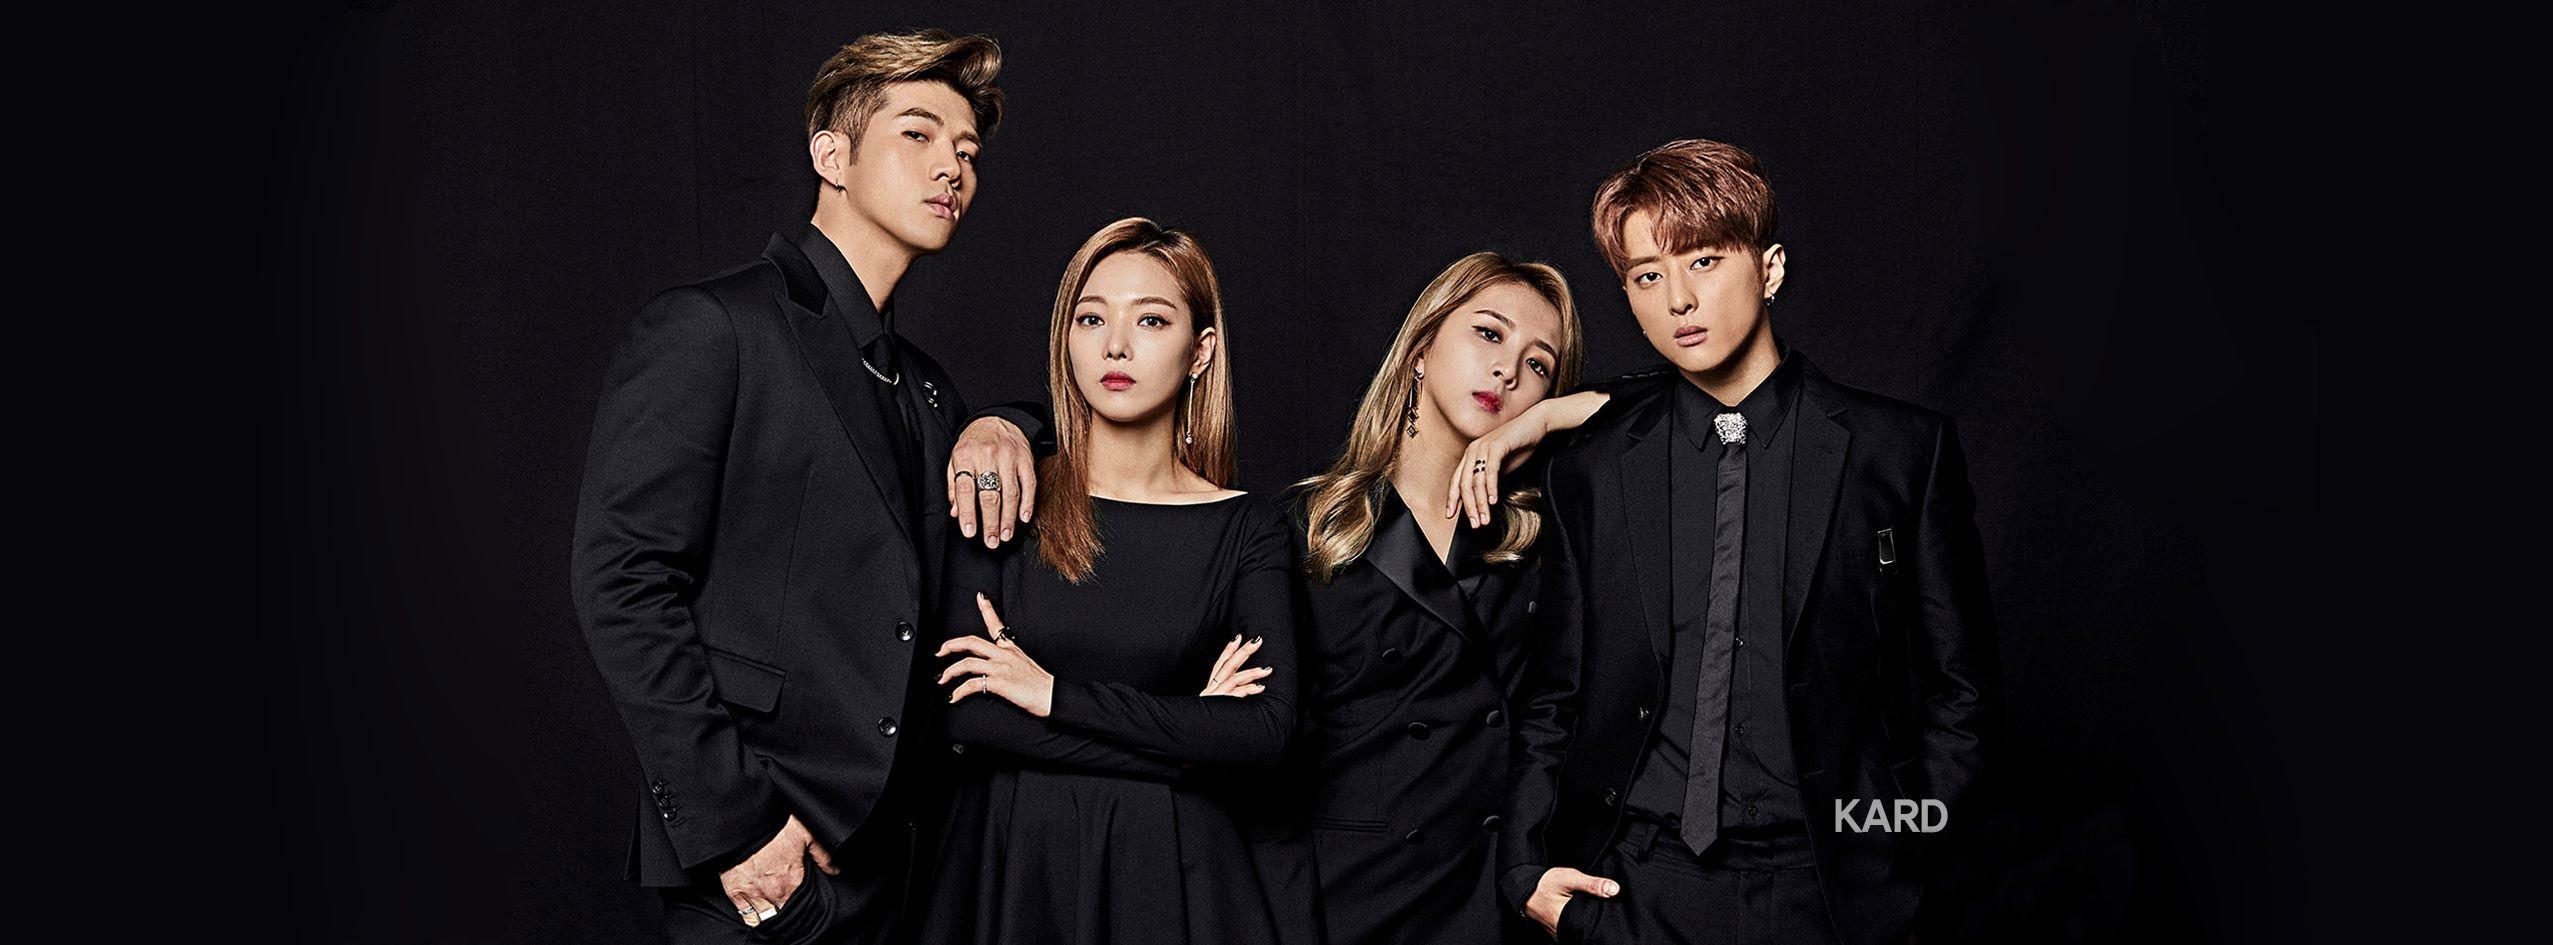 K.A.R.D Profile: DSP Media's New Artist Group with APRIL's SoMin